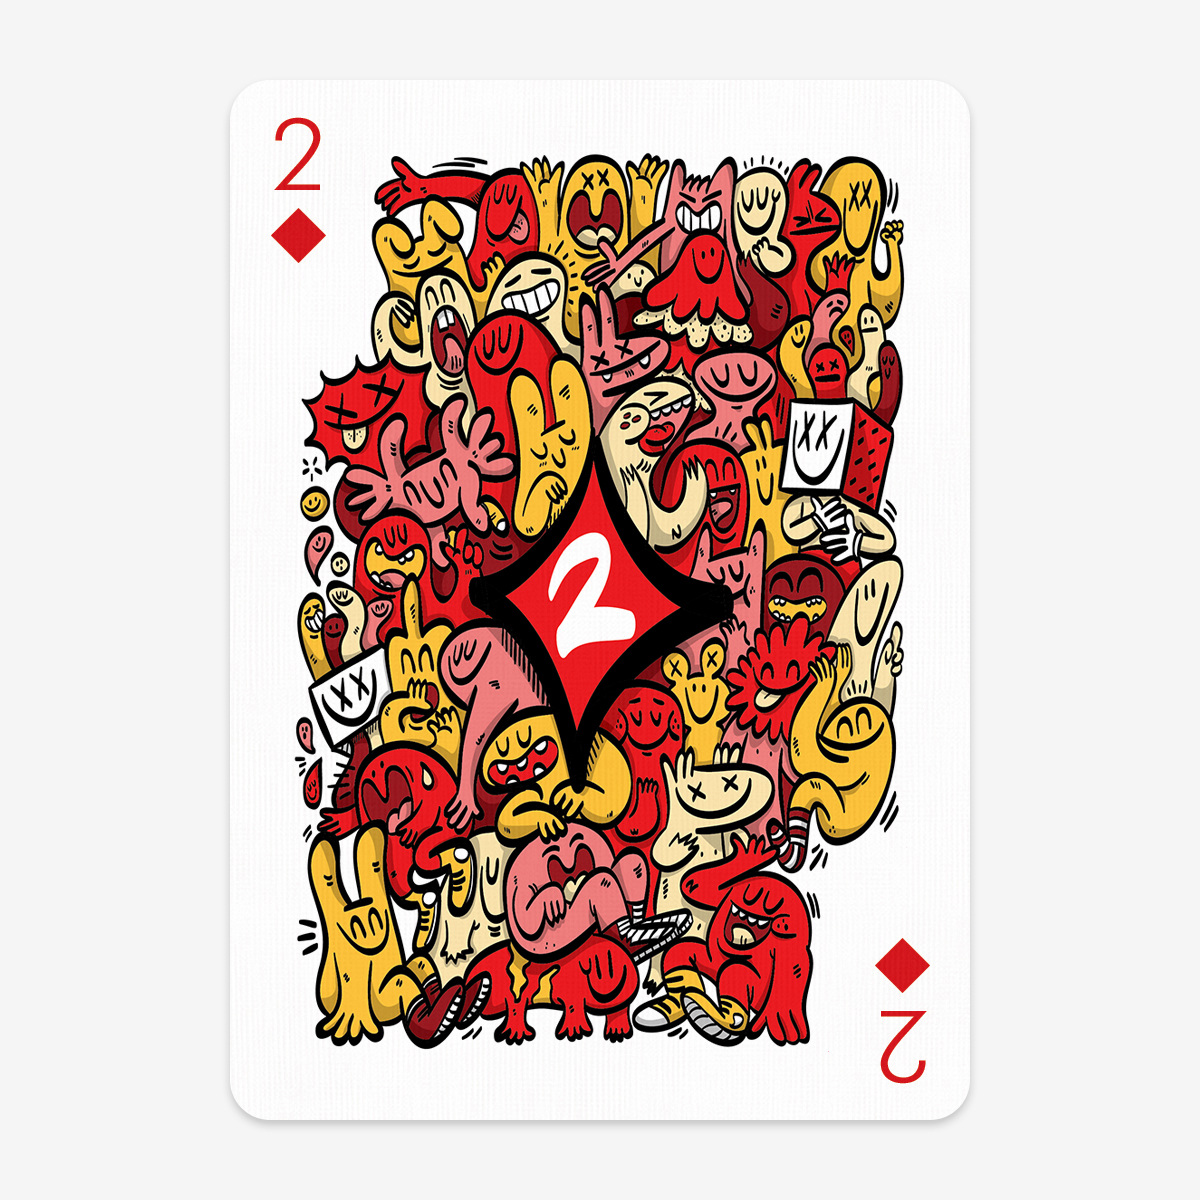 play cards Poker game design contest Illustrator Character creation imagination color Fun friends party chile